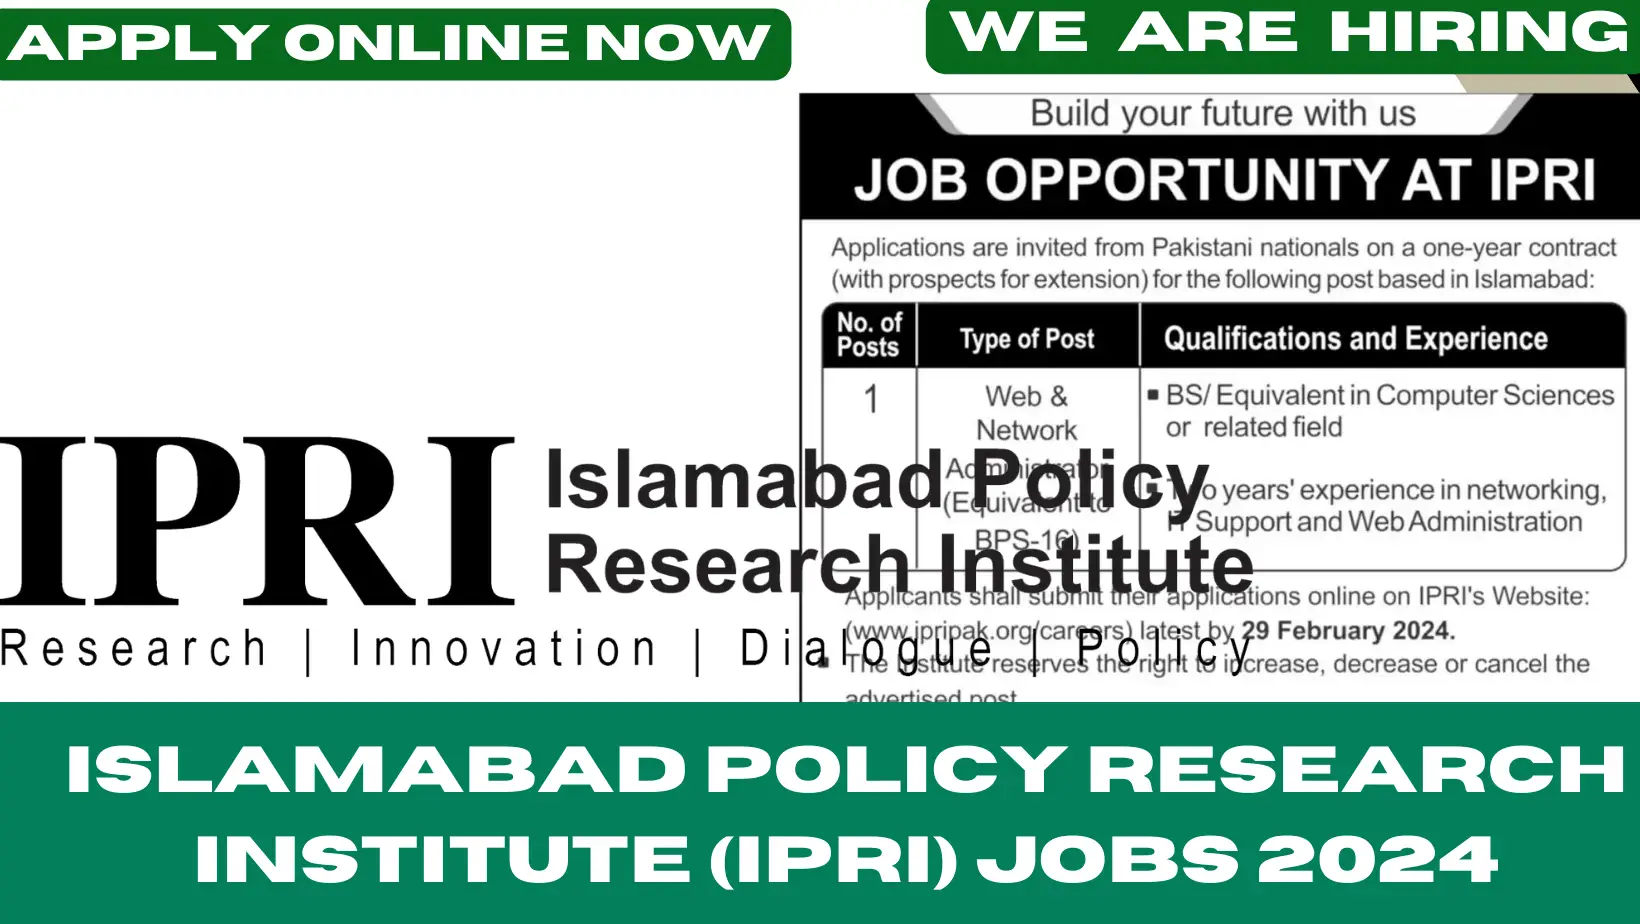 ISLAMABAD-POLICY-RESEARCH-INSTITUTE-(IPRI)